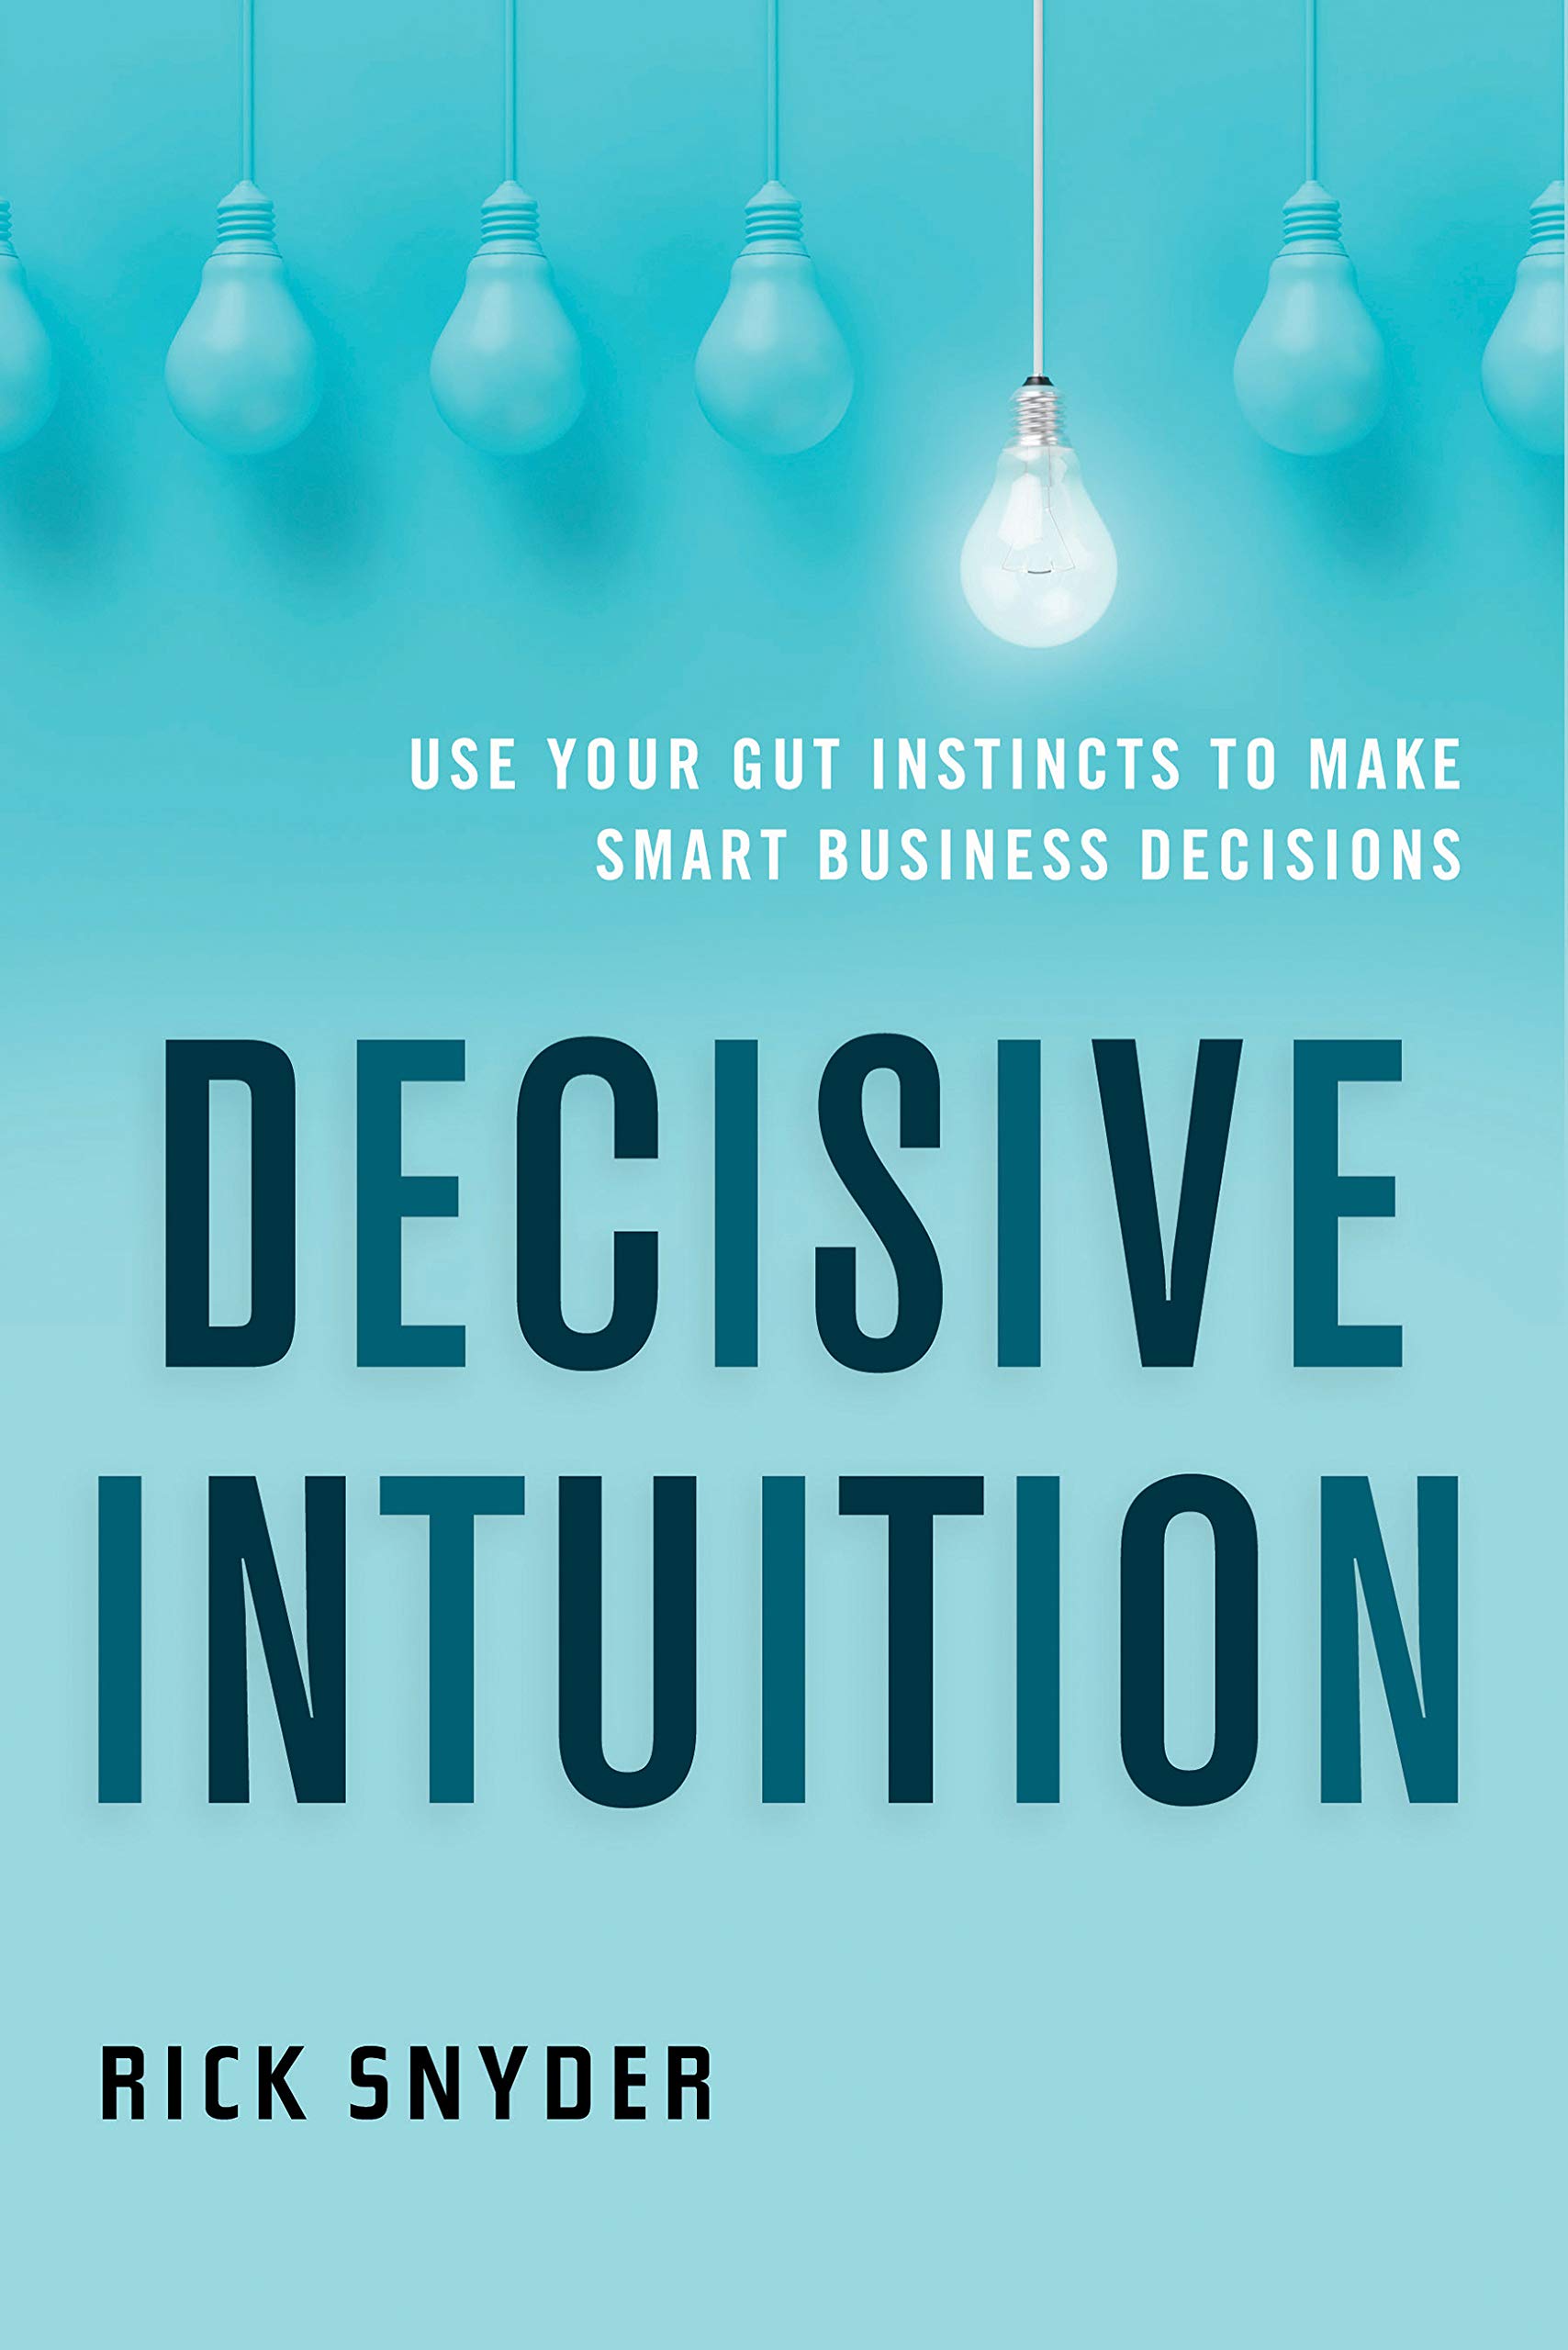 Decisive Intuition: Use Your Gut Instincts to Make Smart Business Decisions